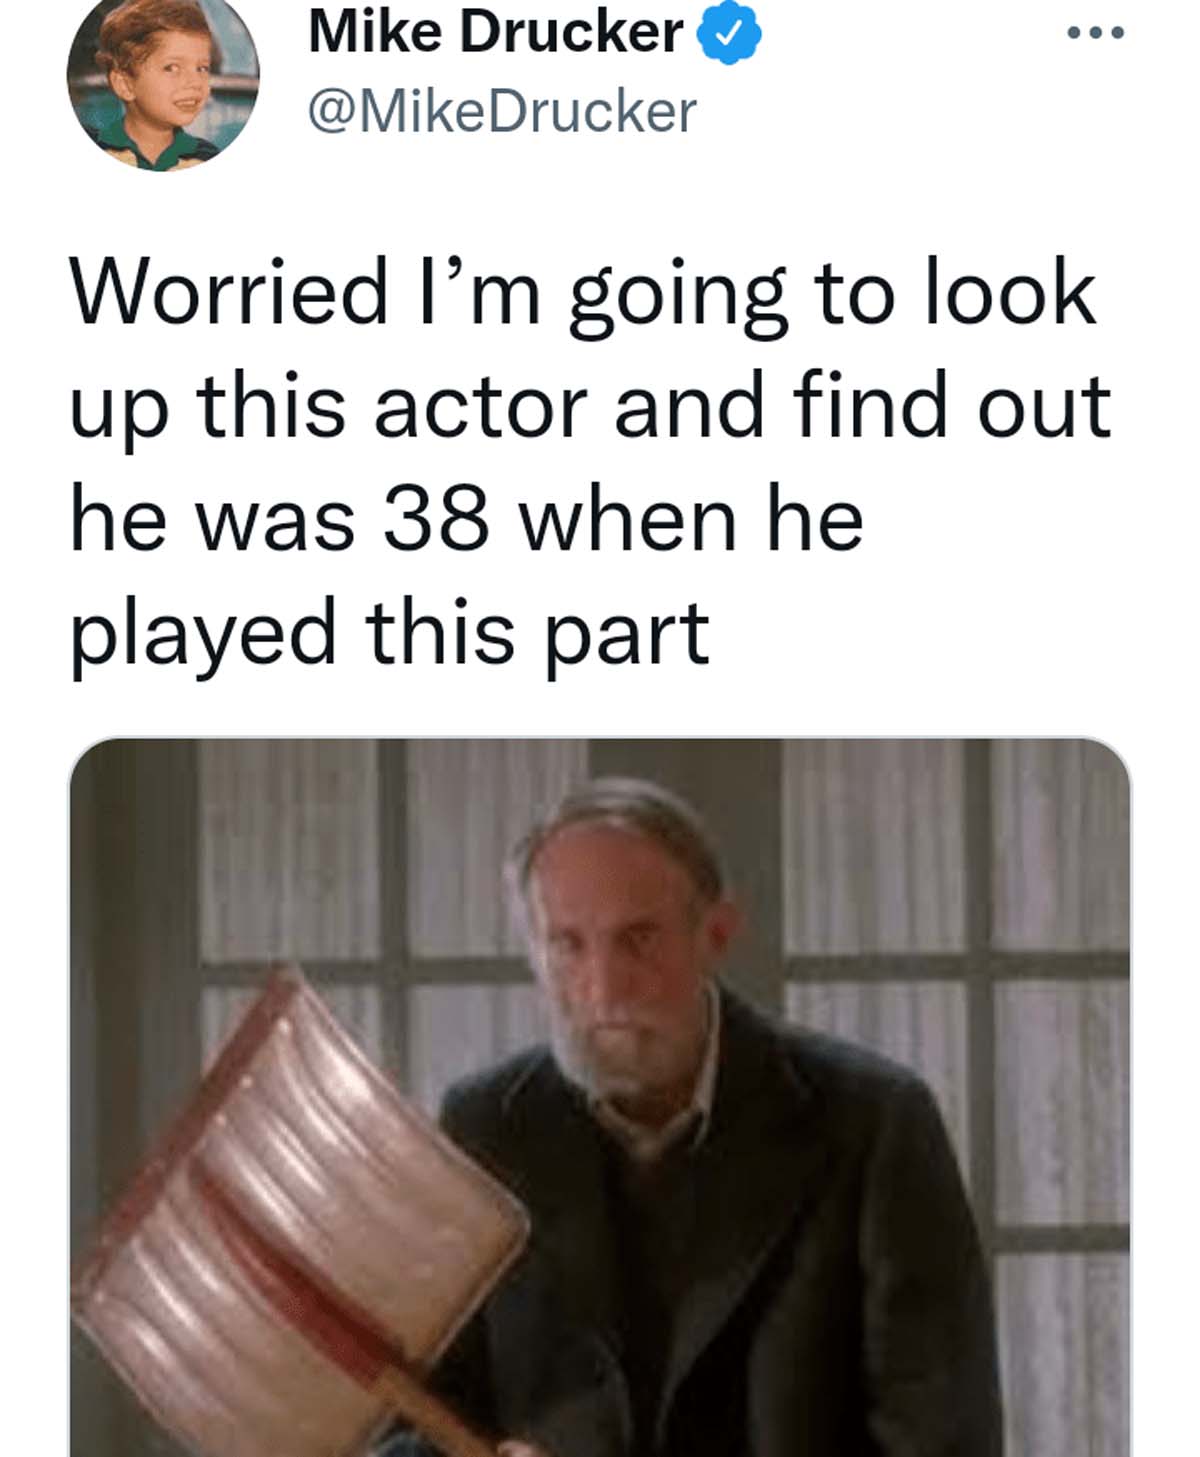 neighbor home alone - Mike Drucker Worried I'm going to look up this actor and find out he was 38 when he played this part